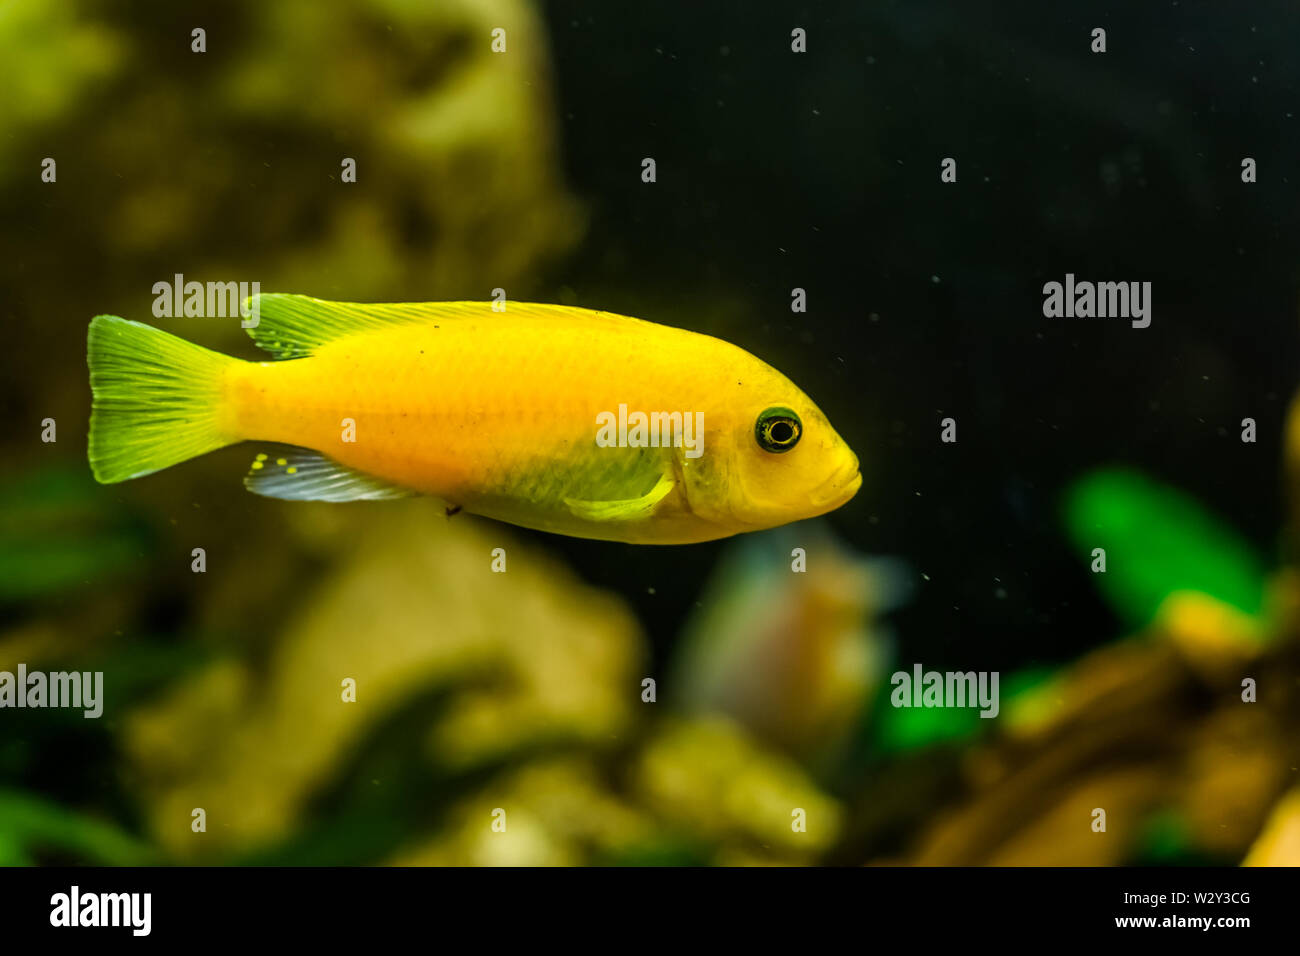 yellow lake malawi cichlid in closeup, popular aqarium pet in aquaculture, tropical fish specie from Africa Stock Photo